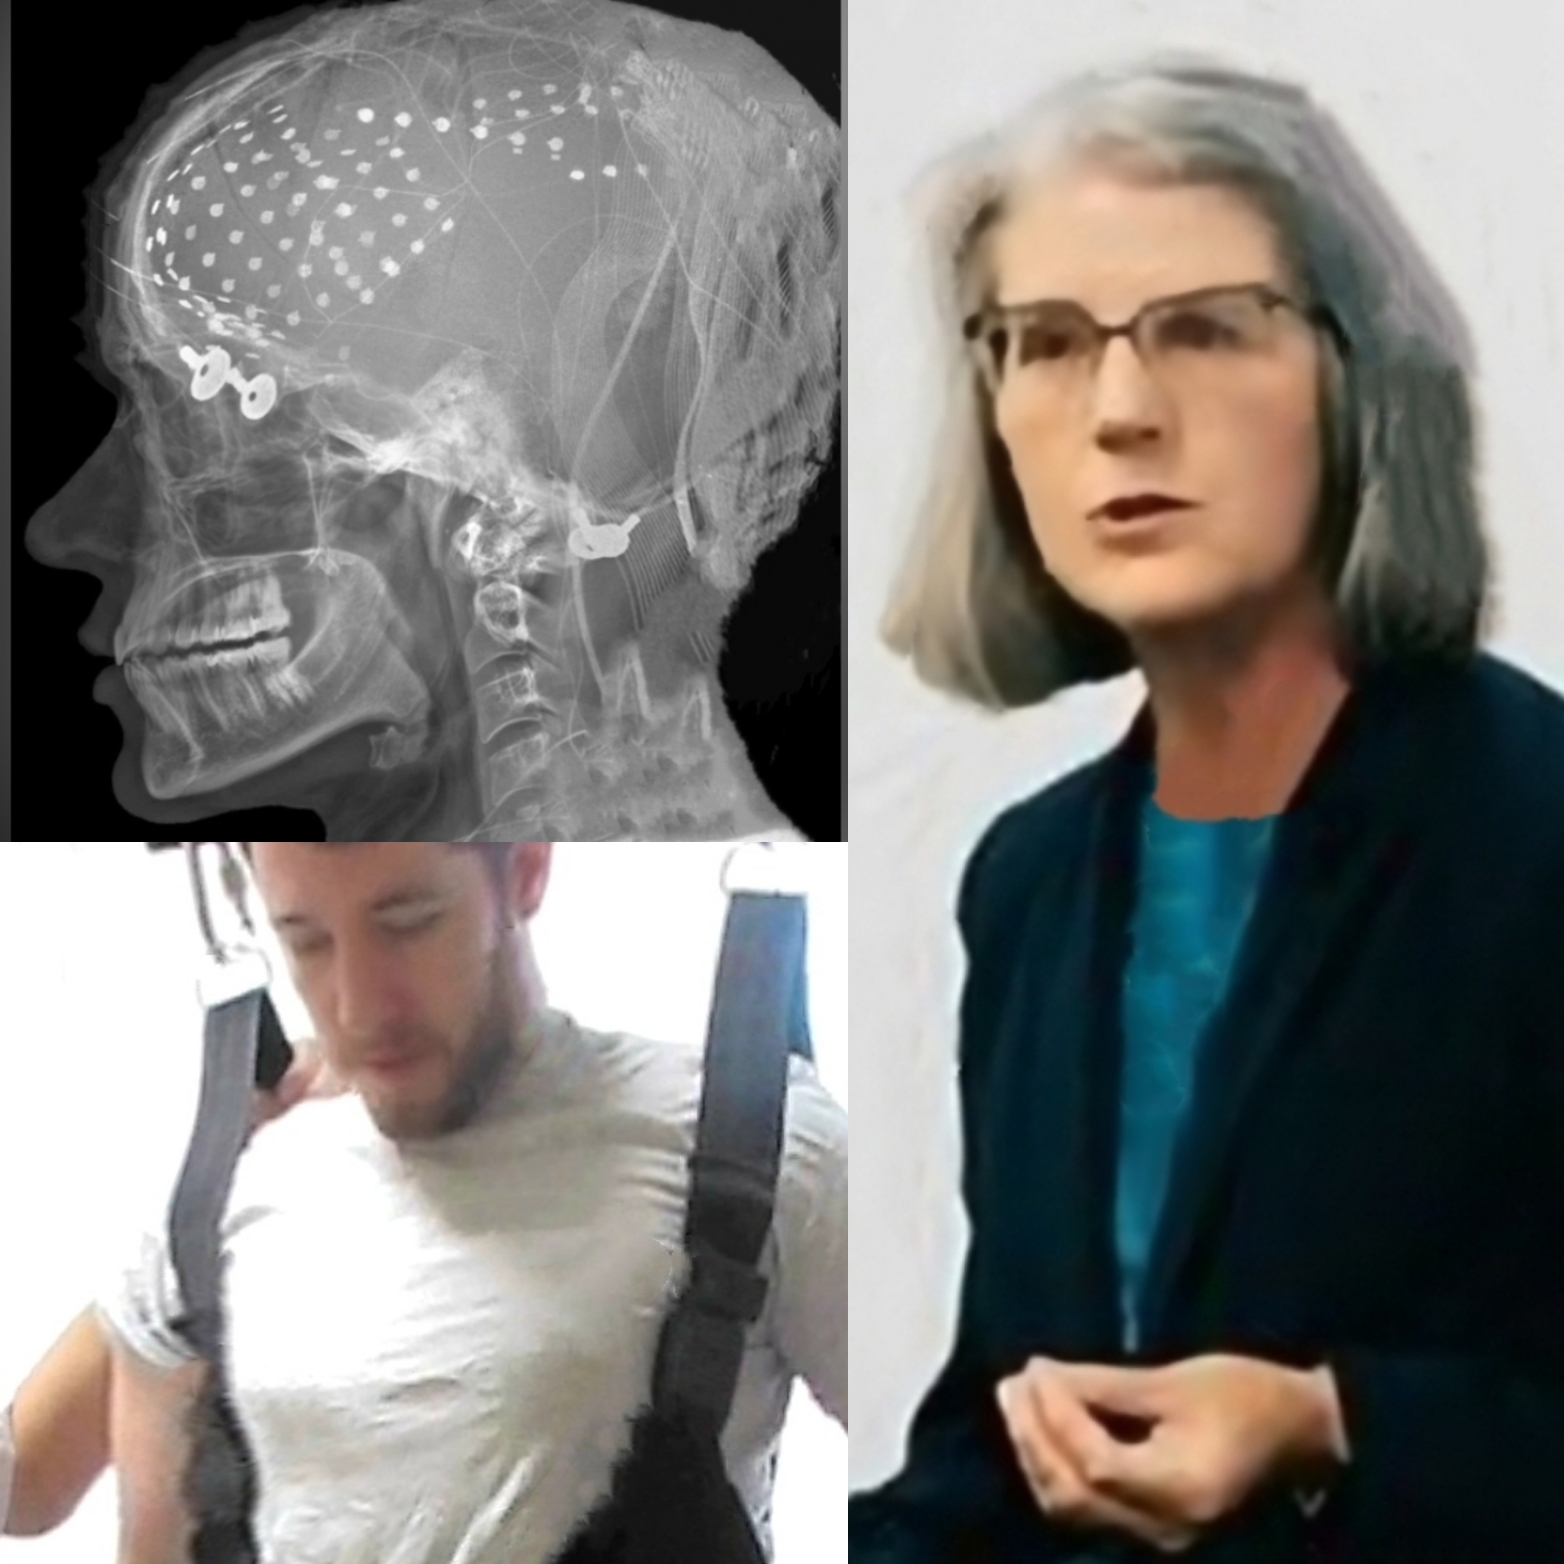 Dr Frincke and Michael MJ The Terrible Johnson Neurotech Brain Implant Photo Collage